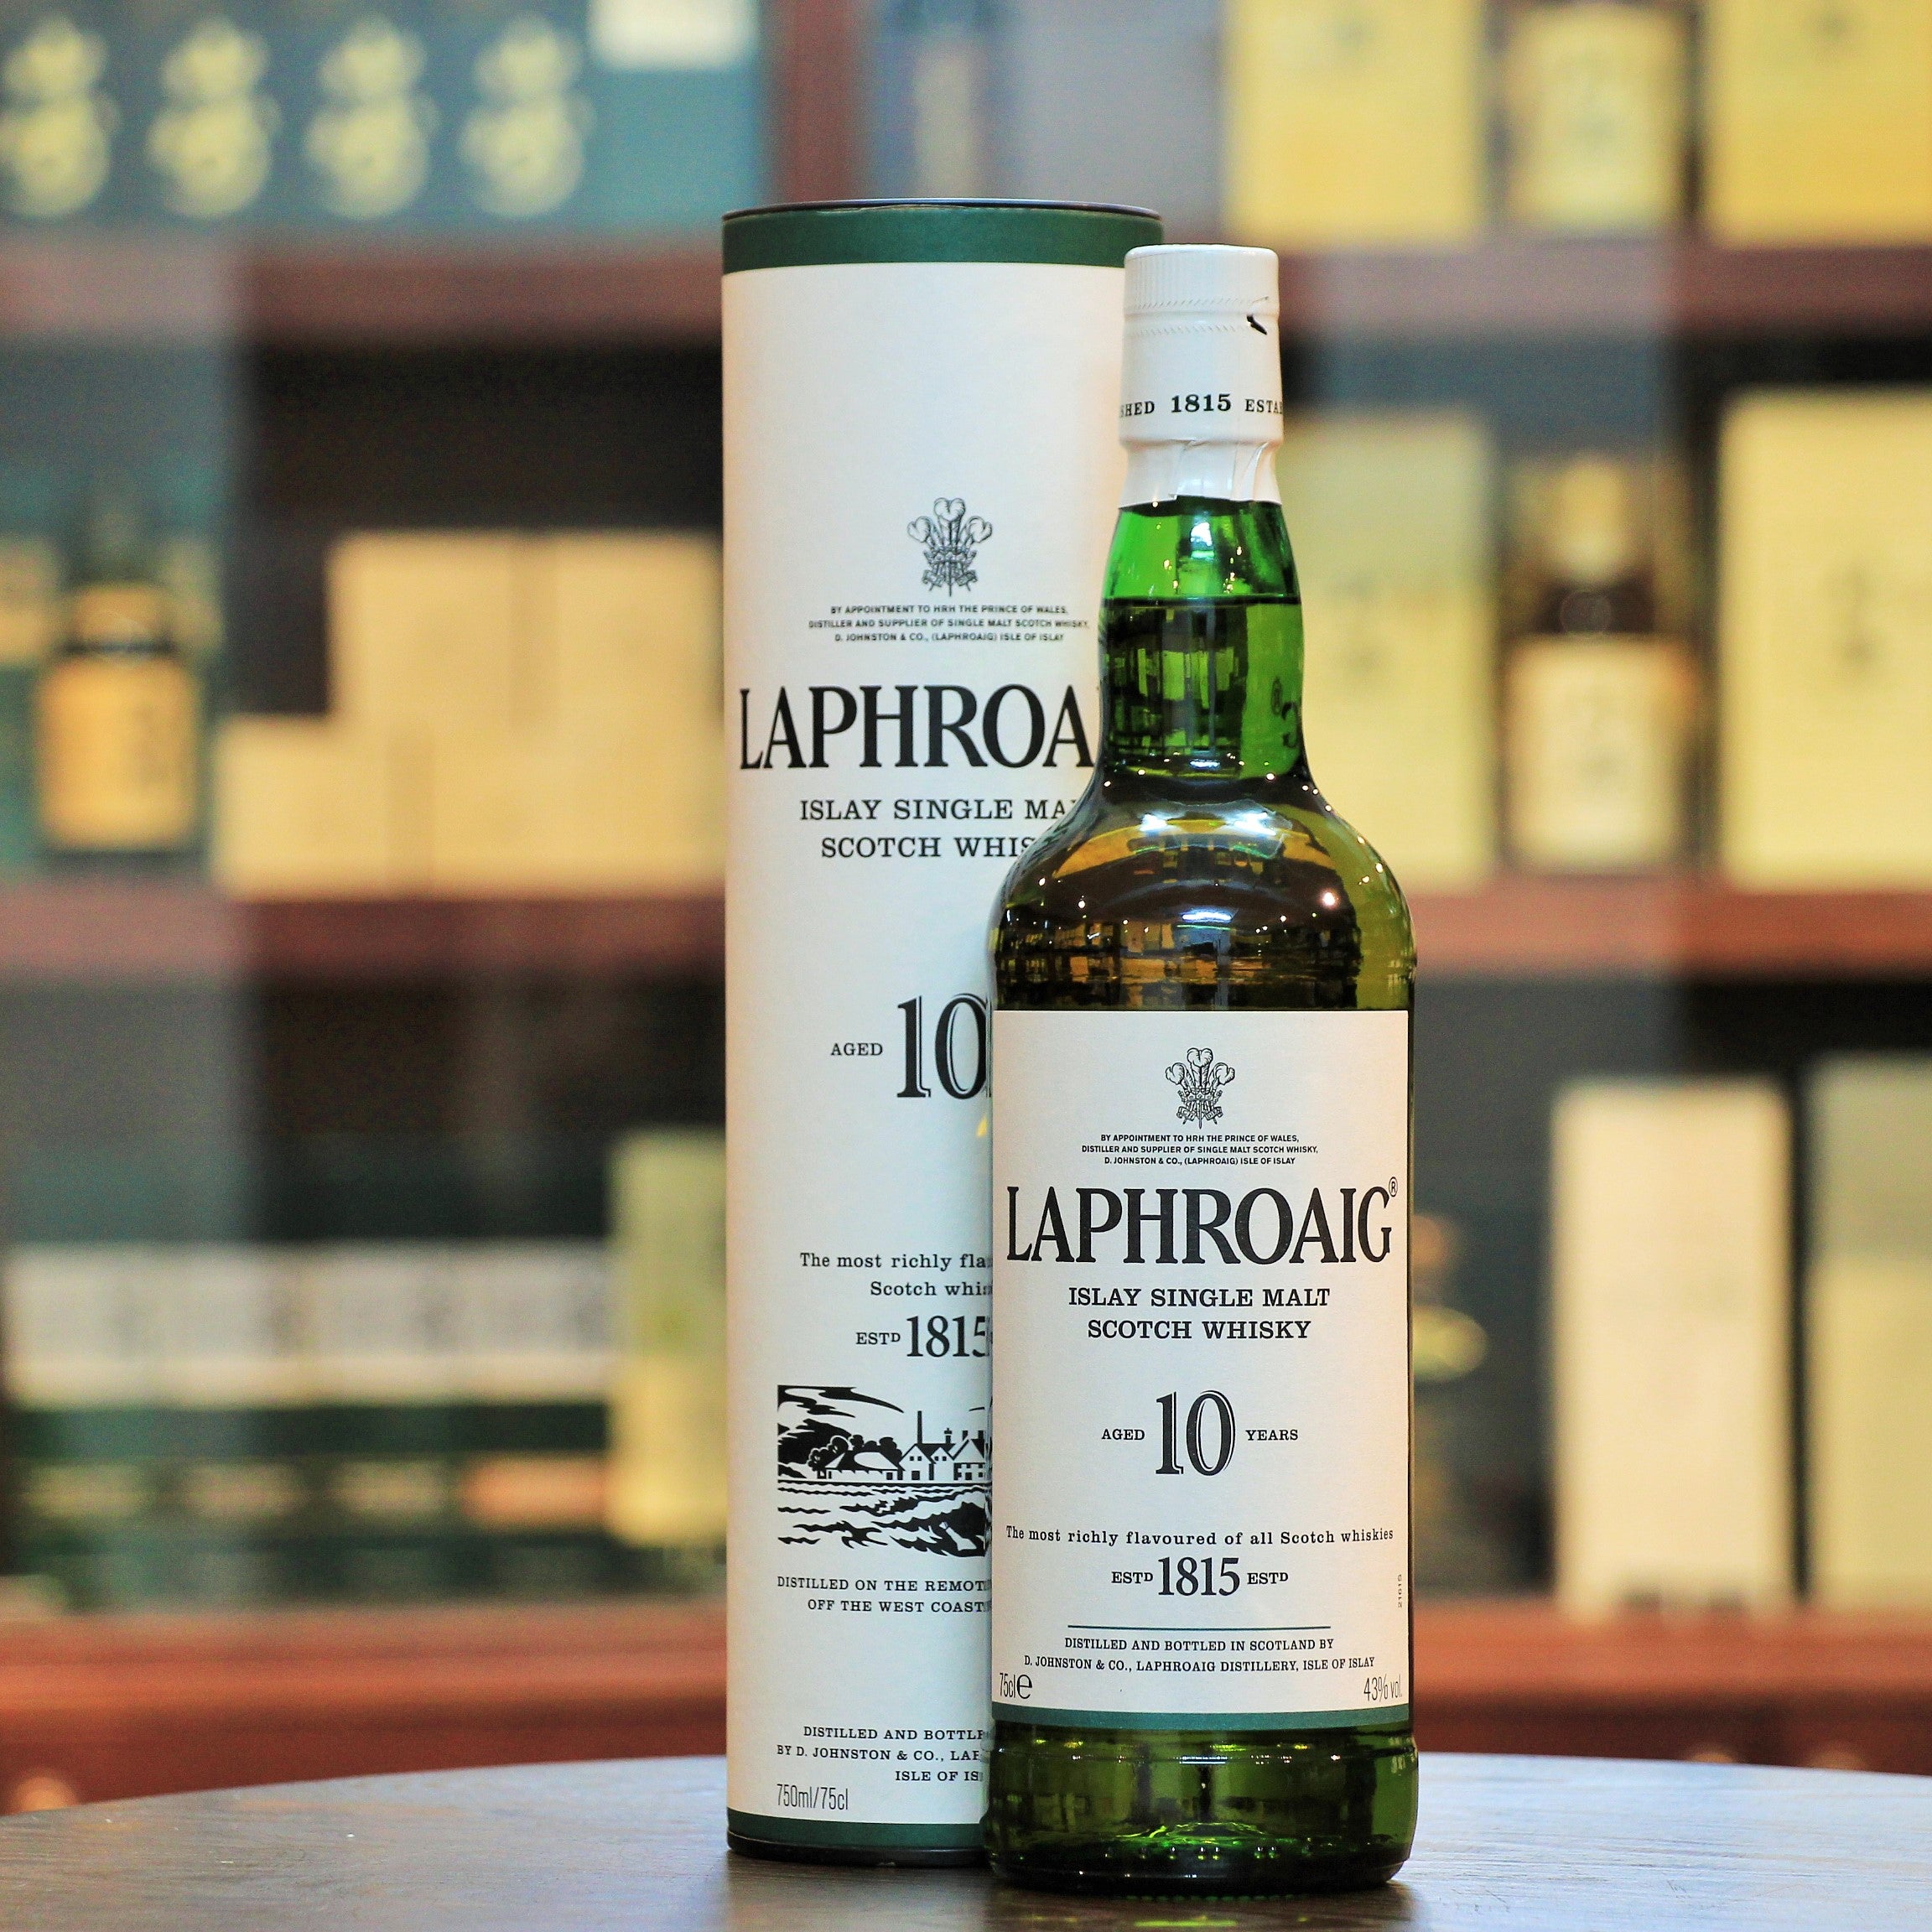 Laphroaig 10 Years 43% Single Malt, A special version of the Laphroaig 10. This is the 750 ml bottled at 43% vs the usual 700 ml bottled at 40%. Embodies the classic Islay characteristics with an increased strength.